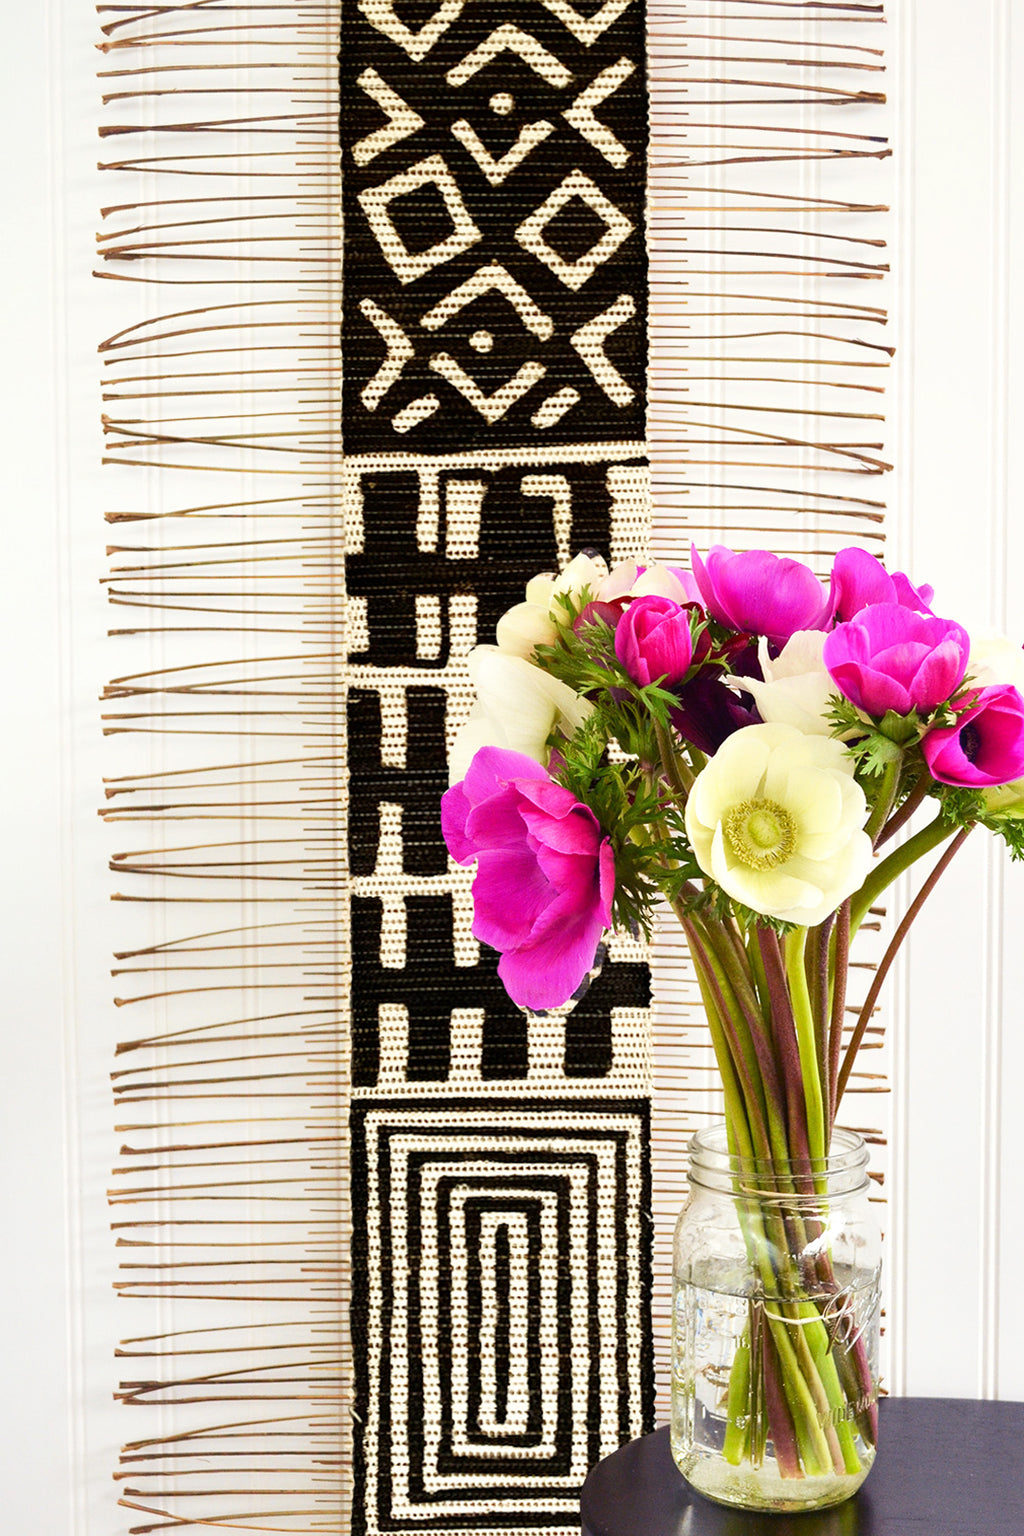 Black and White Multi-Pattern Twig Runner